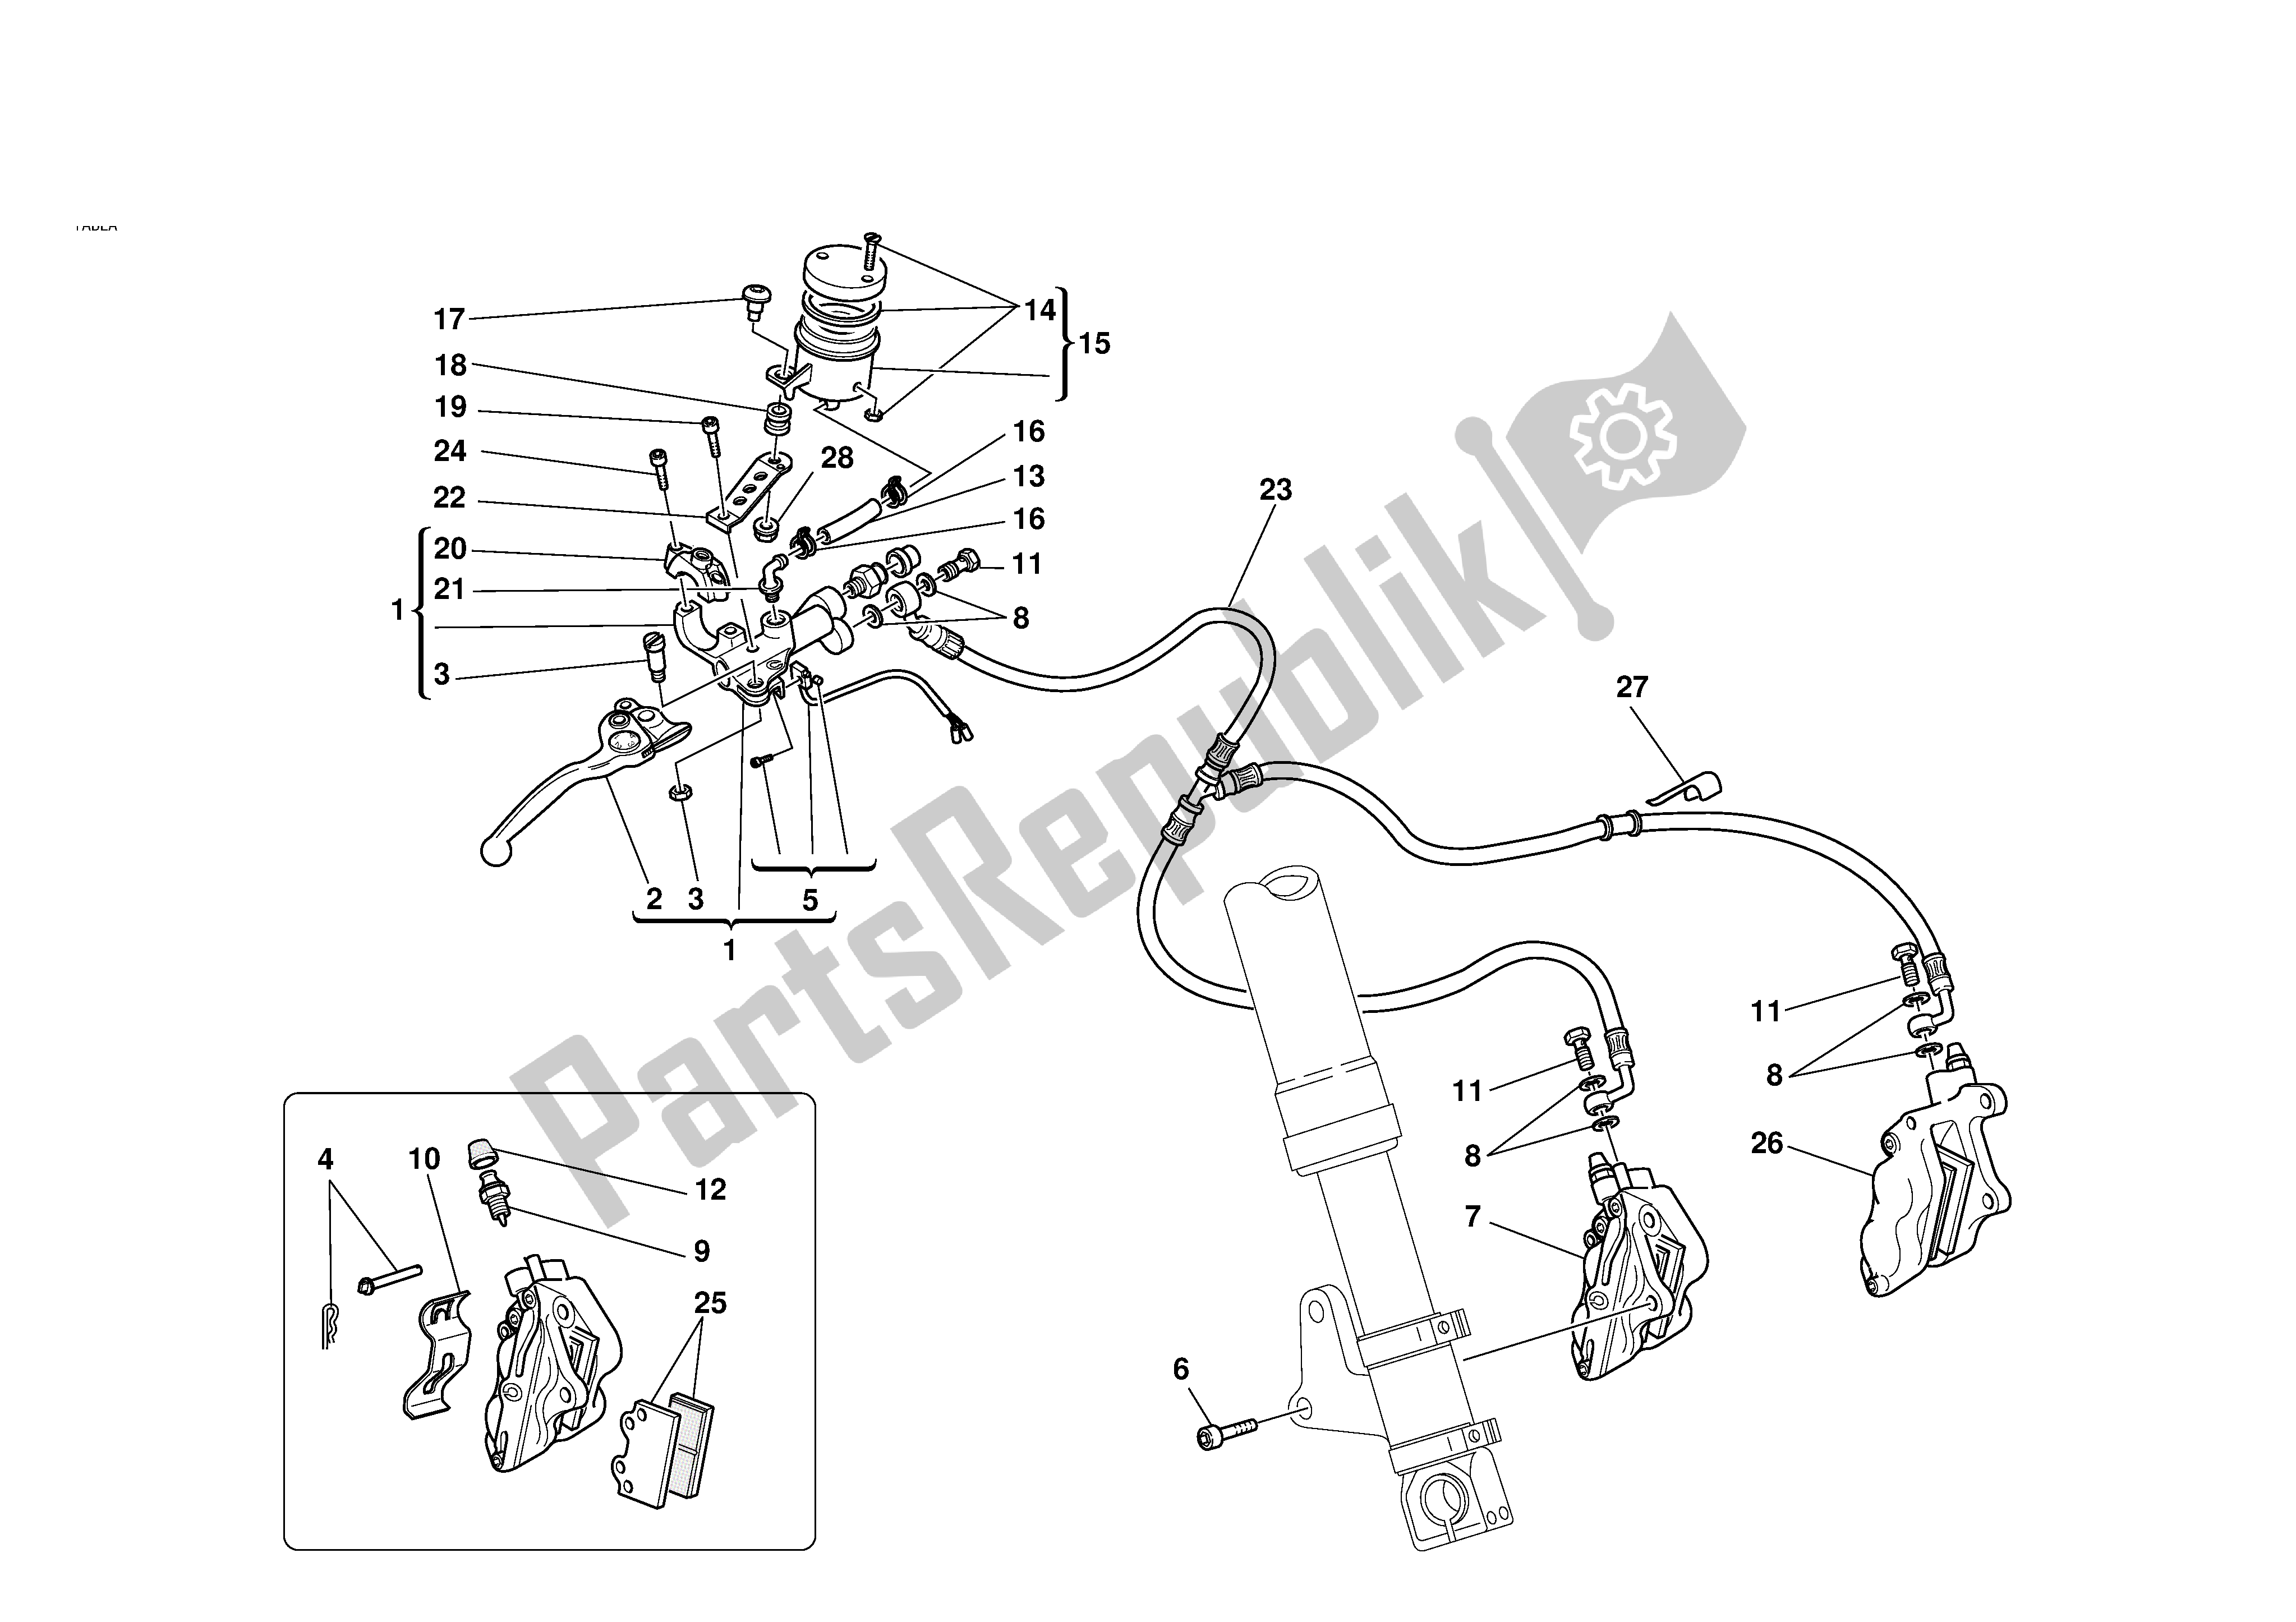 All parts for the Front Brake of the Ducati Monster 1000 2004